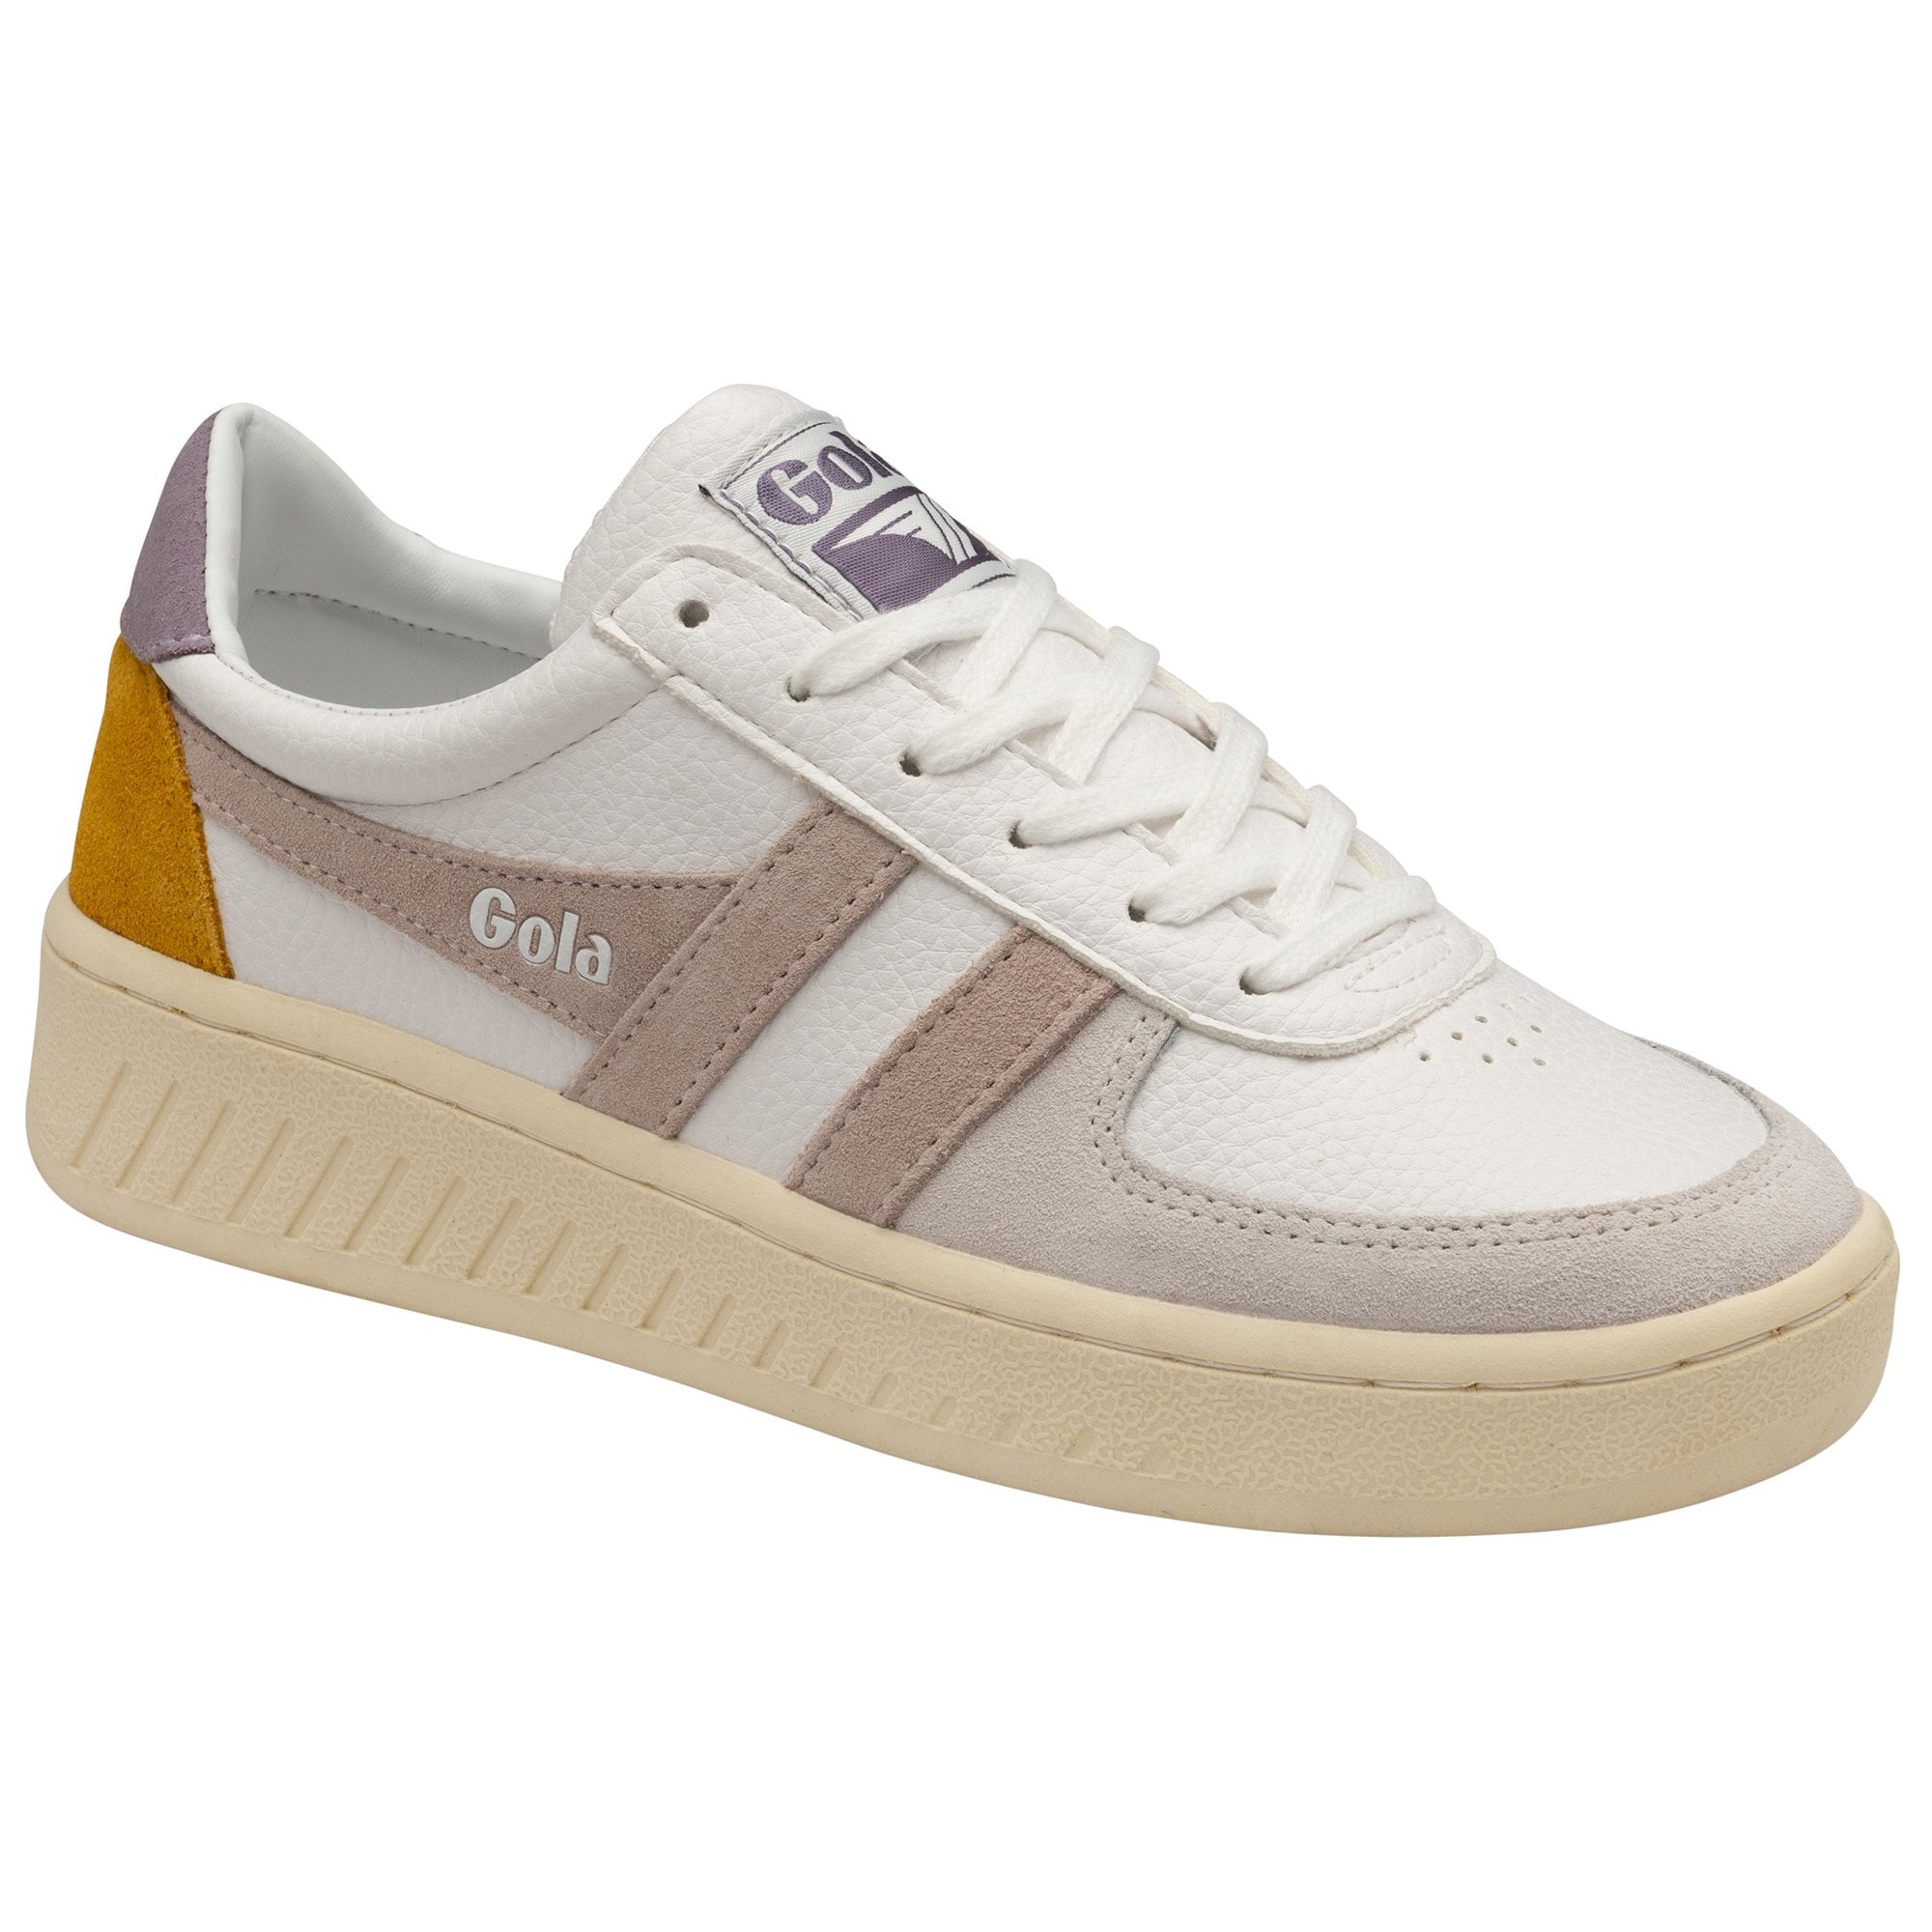 Women's Grand slam Leather Trainers, White/Blossom/Lily